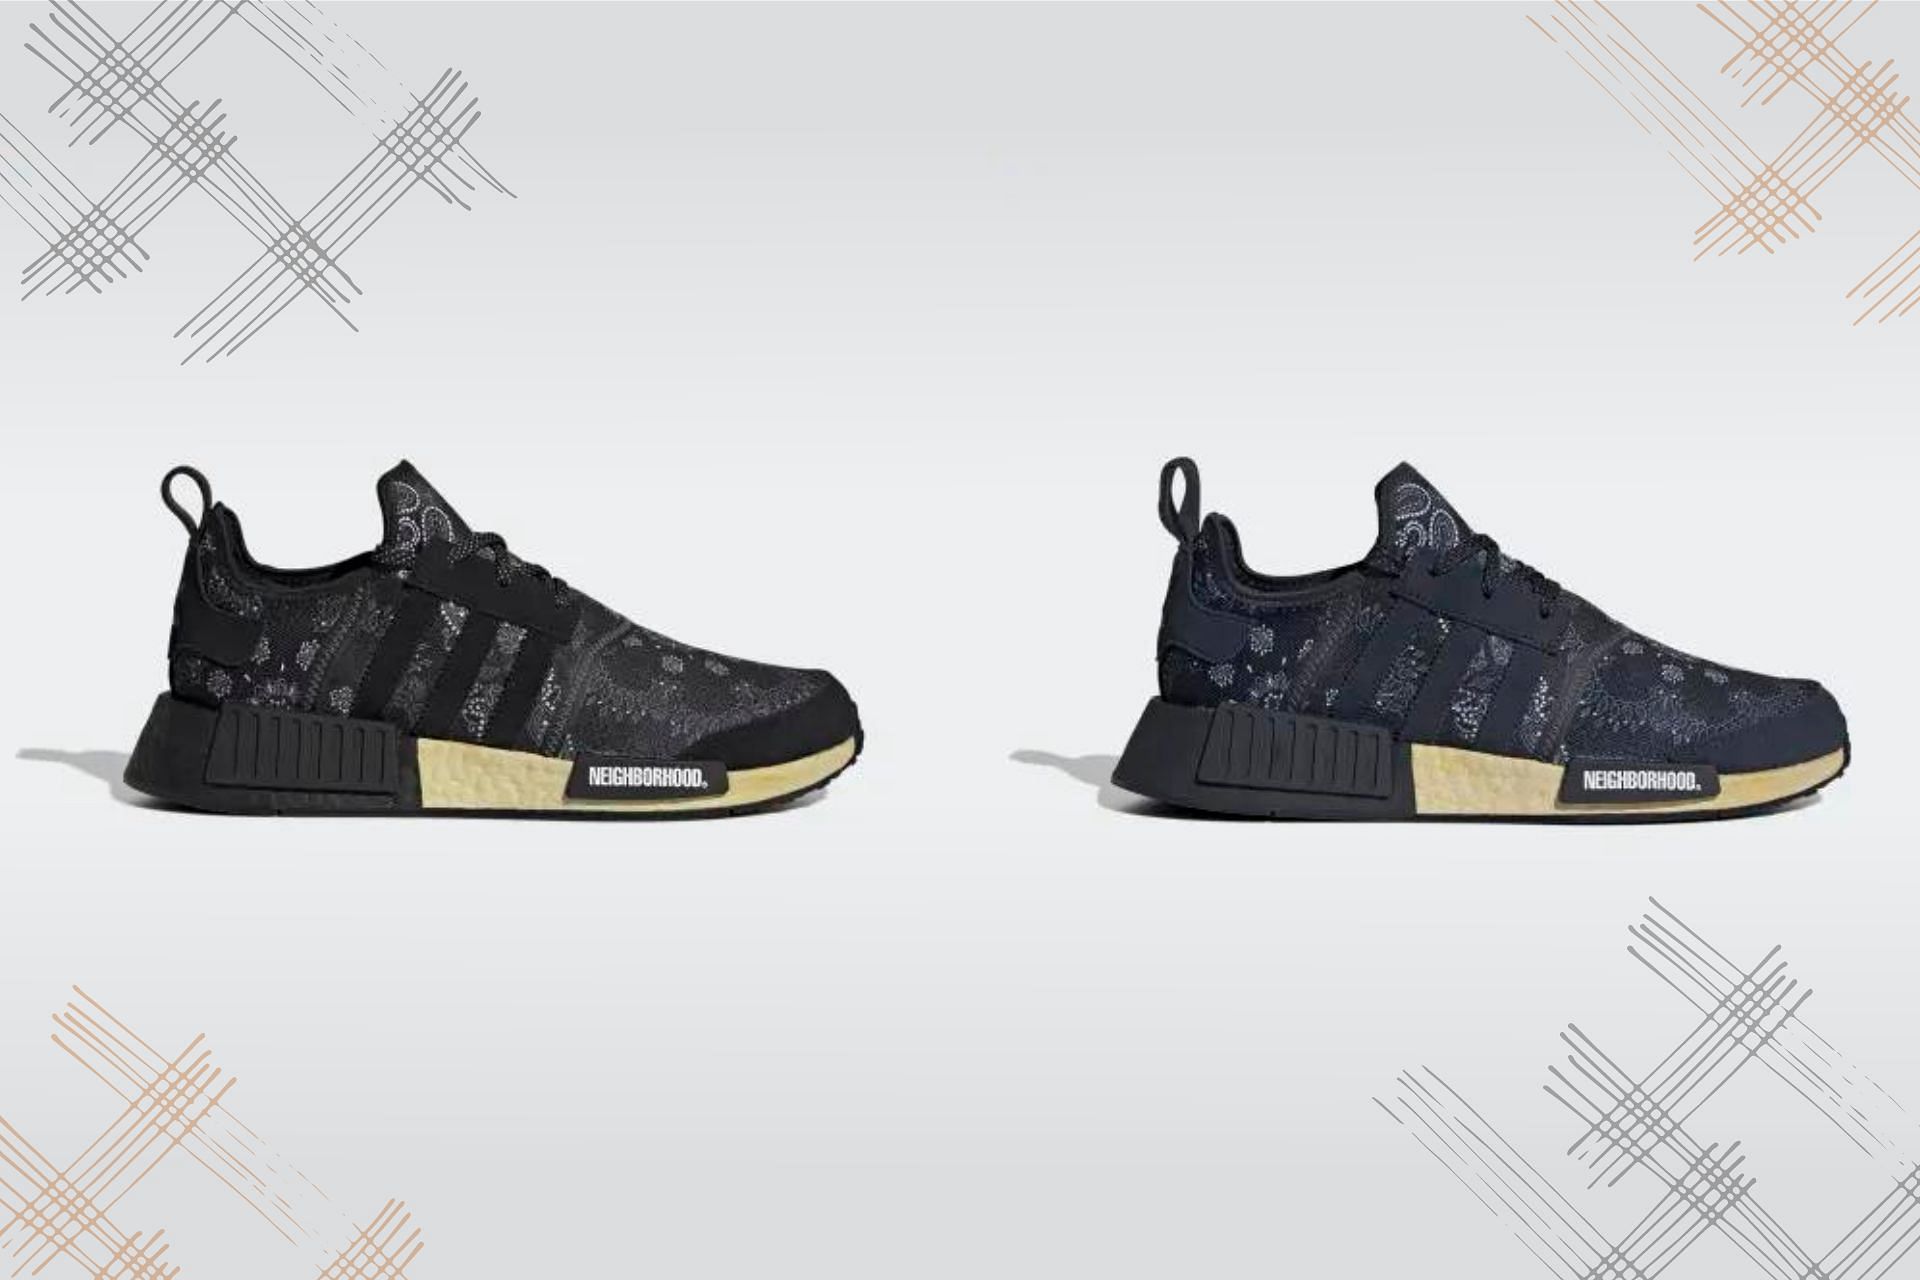 Where to buy Neighborhood x Adidas NMD pack? release and more explored